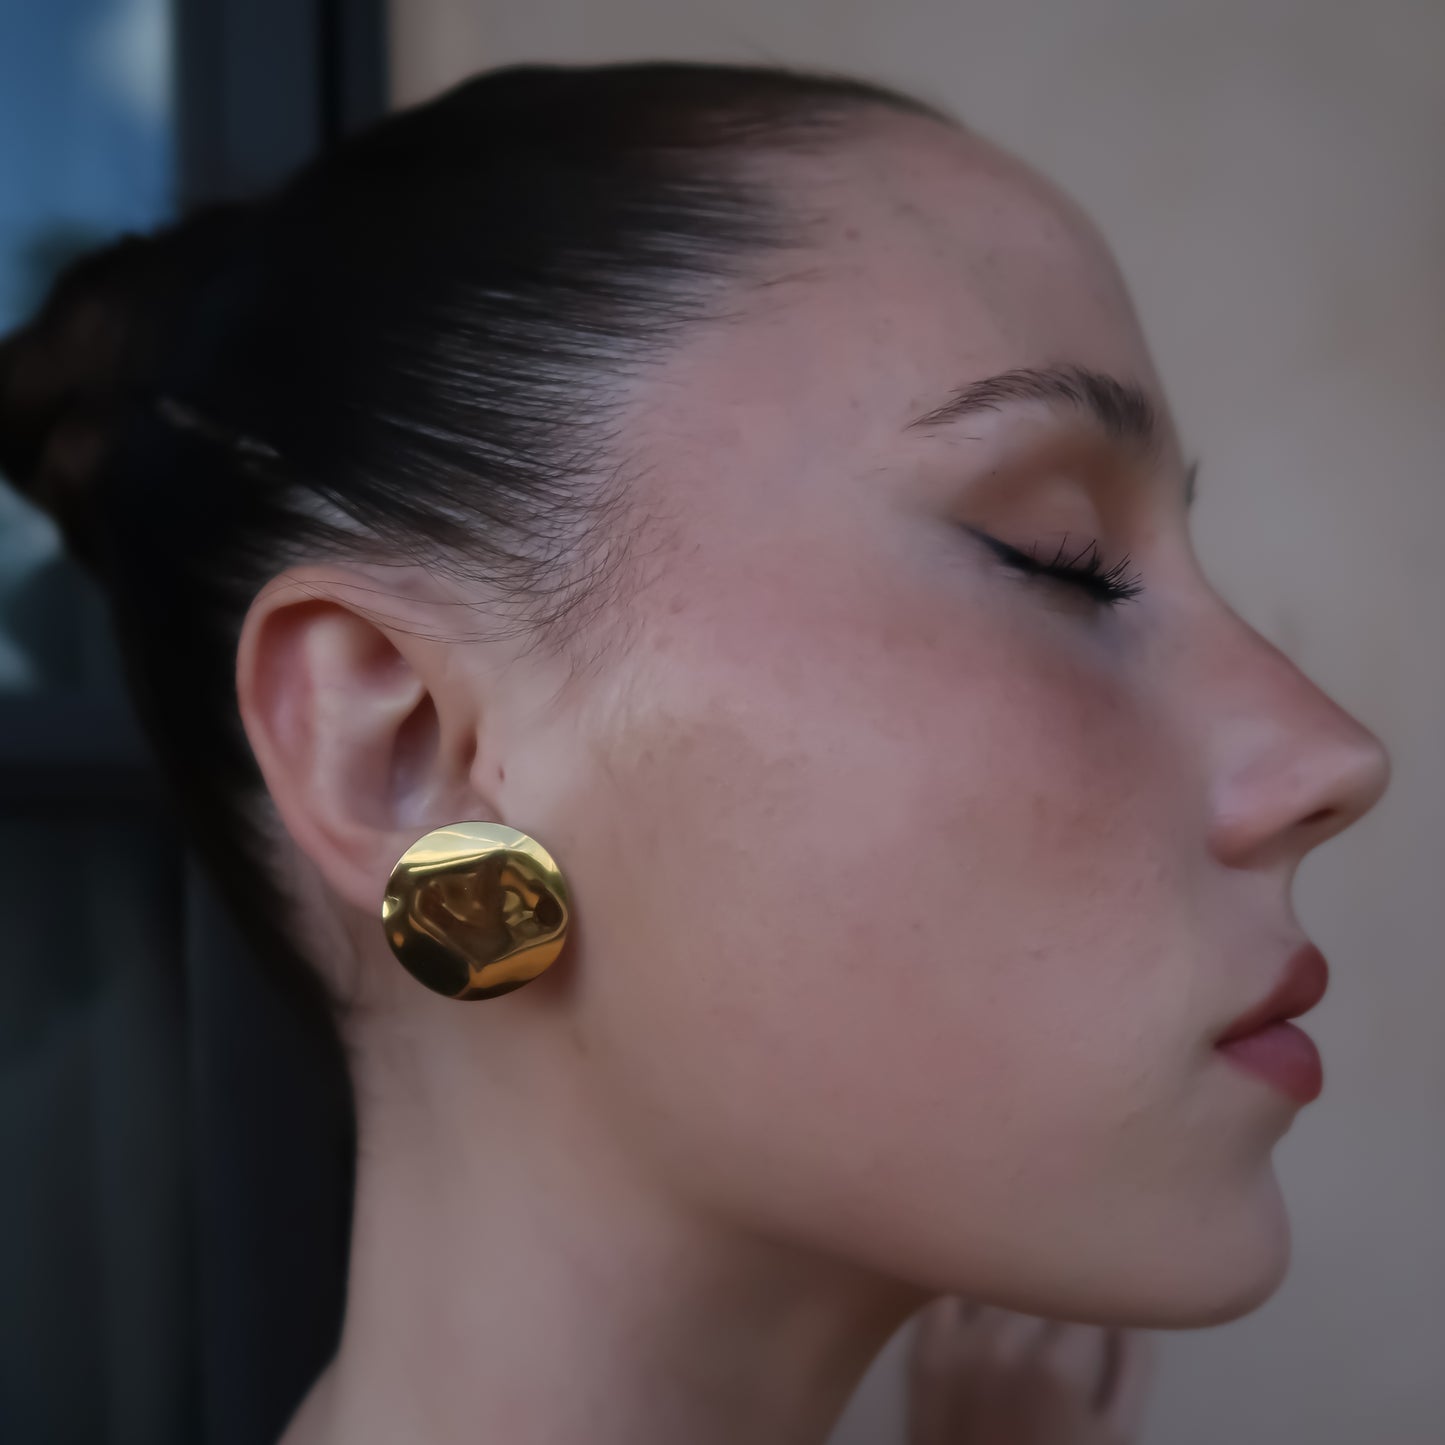 GOLD HAMMERED DISC EARRINGS